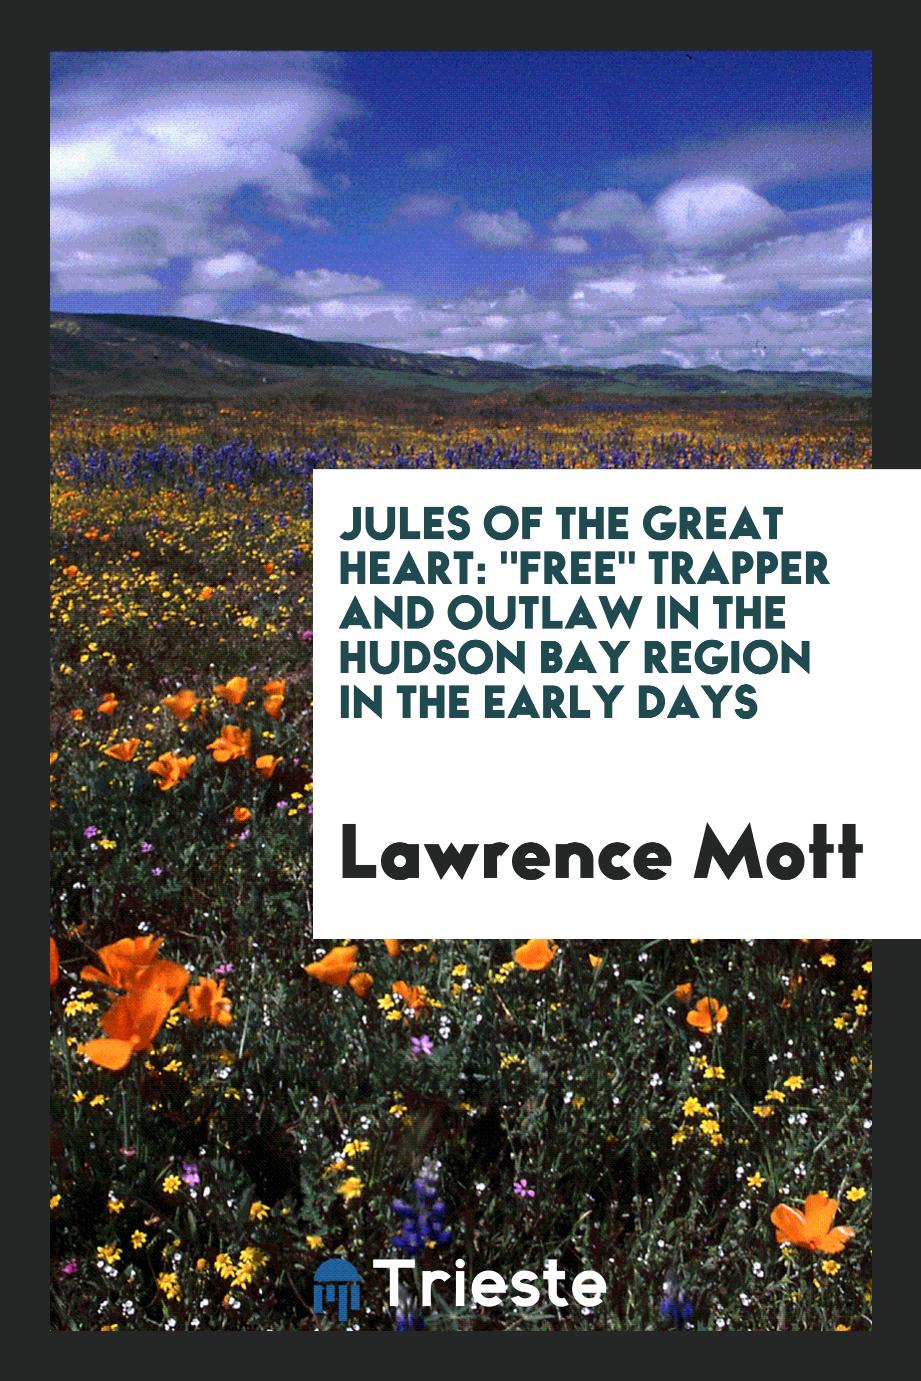 Jules of the Great Heart: "Free" Trapper and Outlaw in the Hudson Bay Region in the Early Days